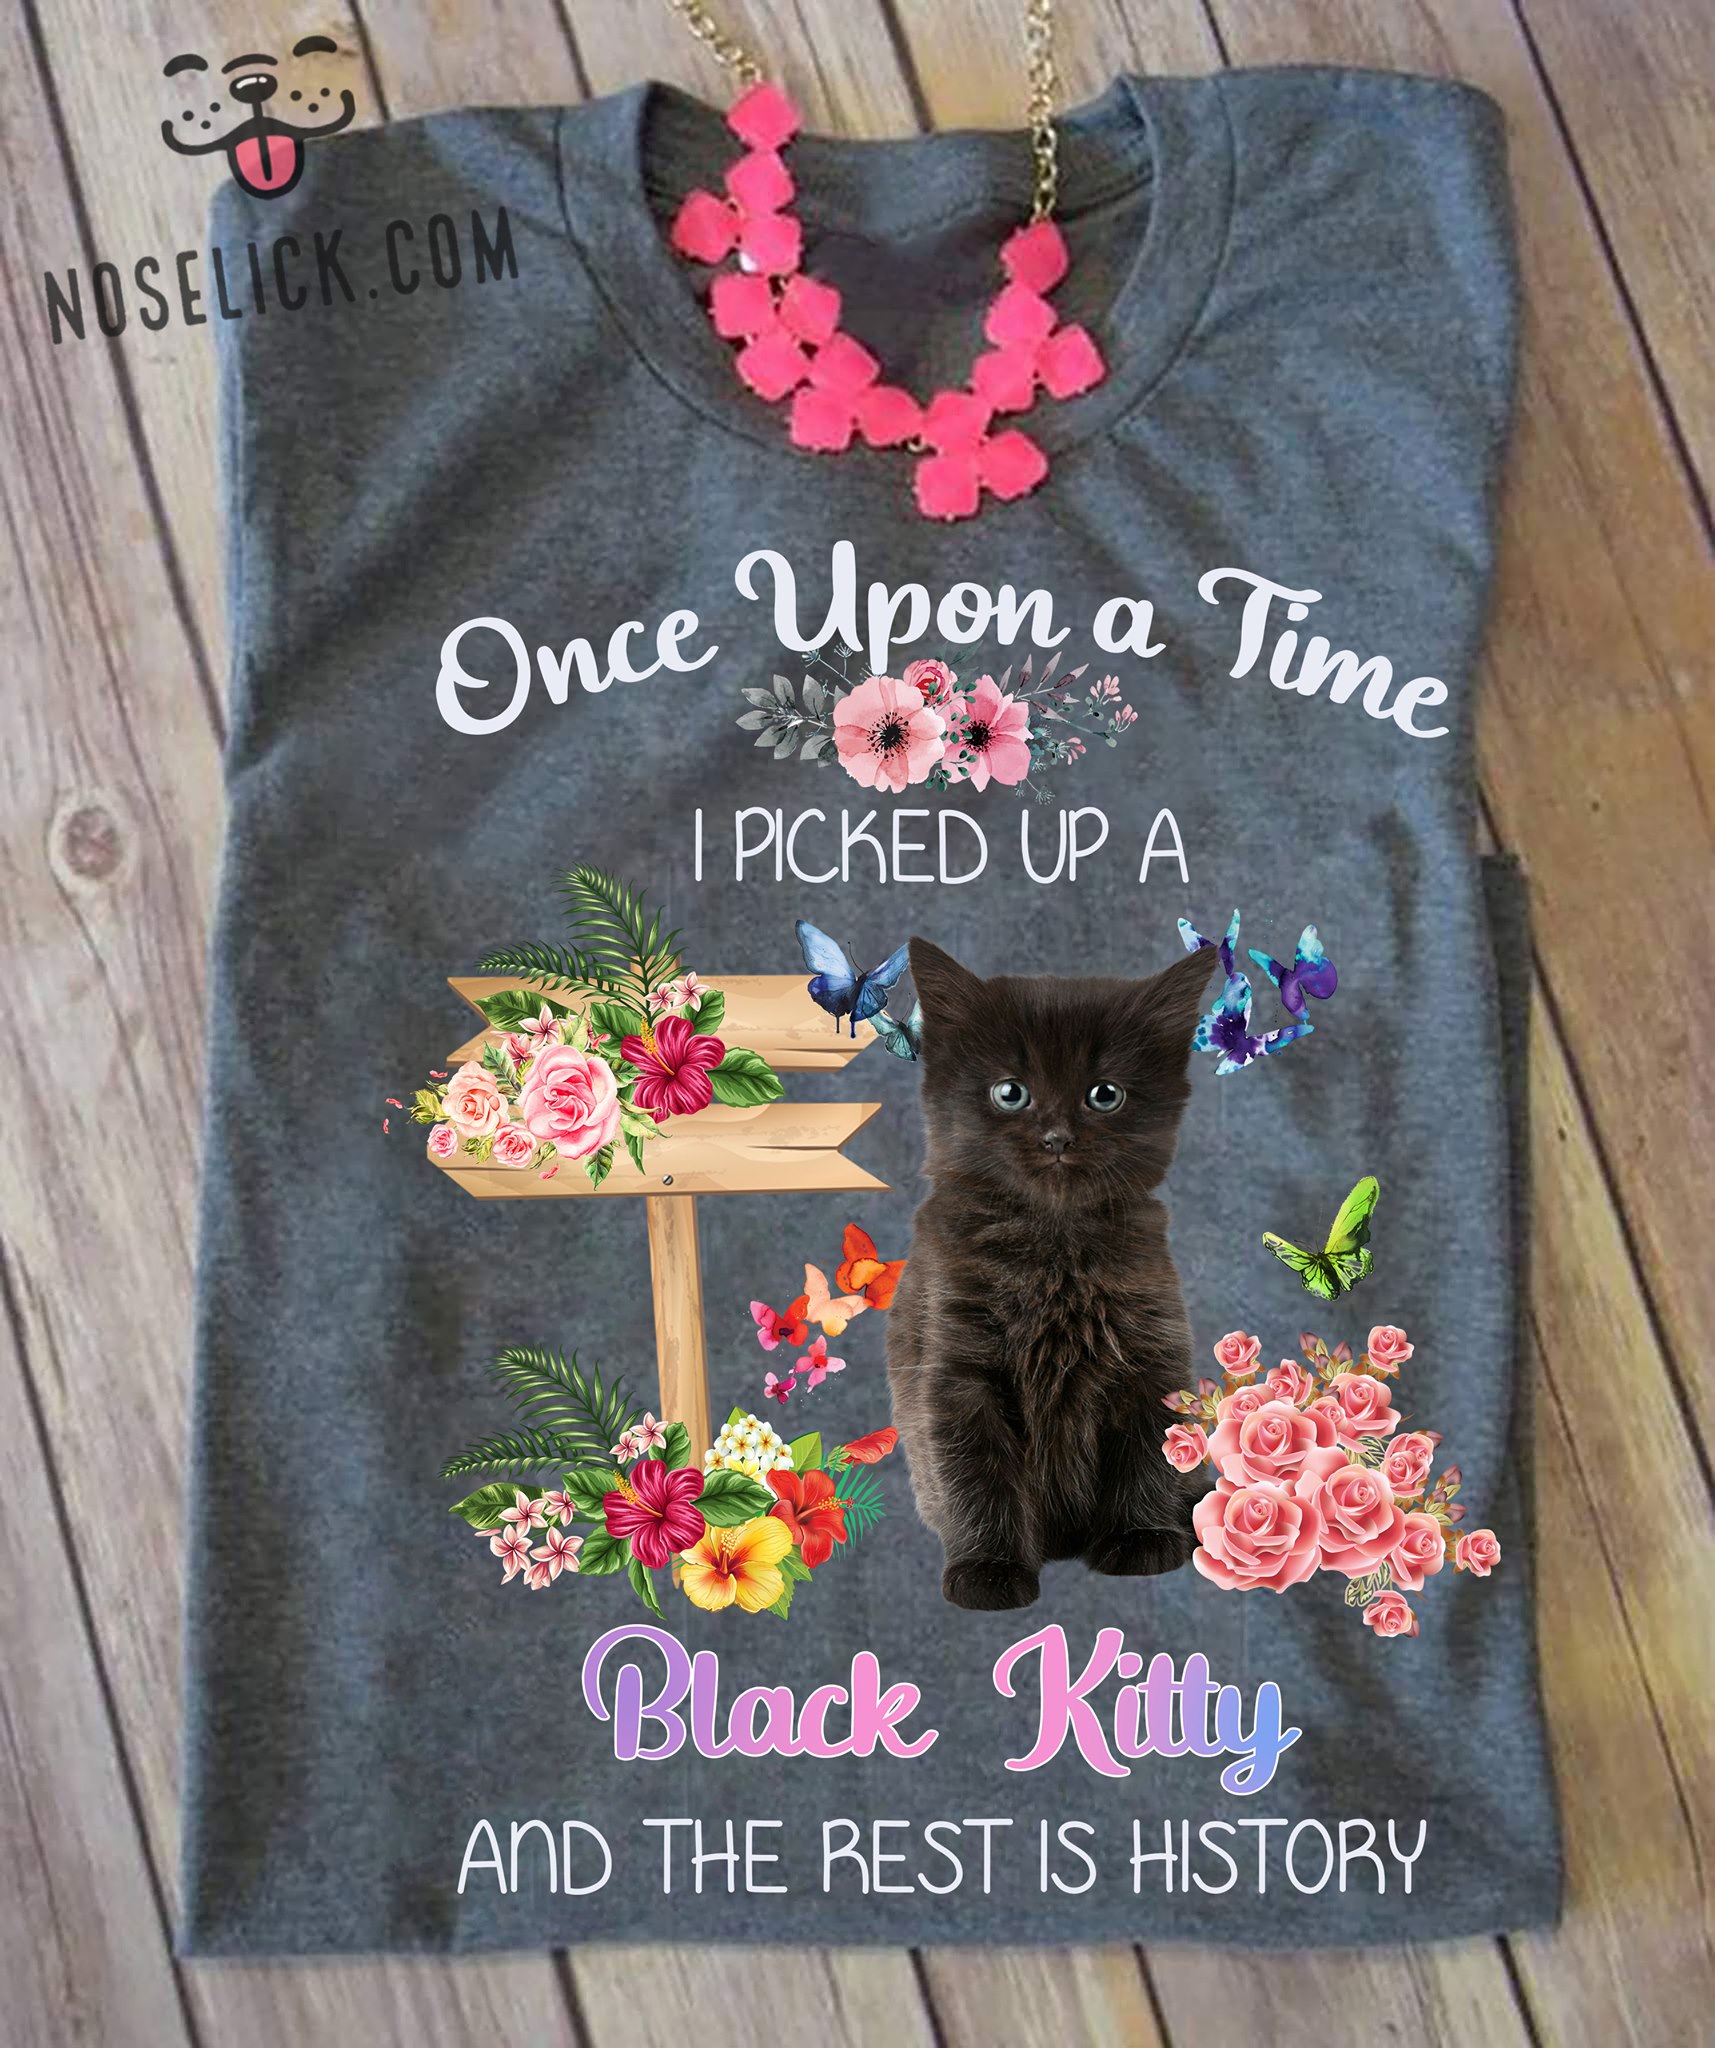 Once upon a time I picked up a Black kitty and the rest is history